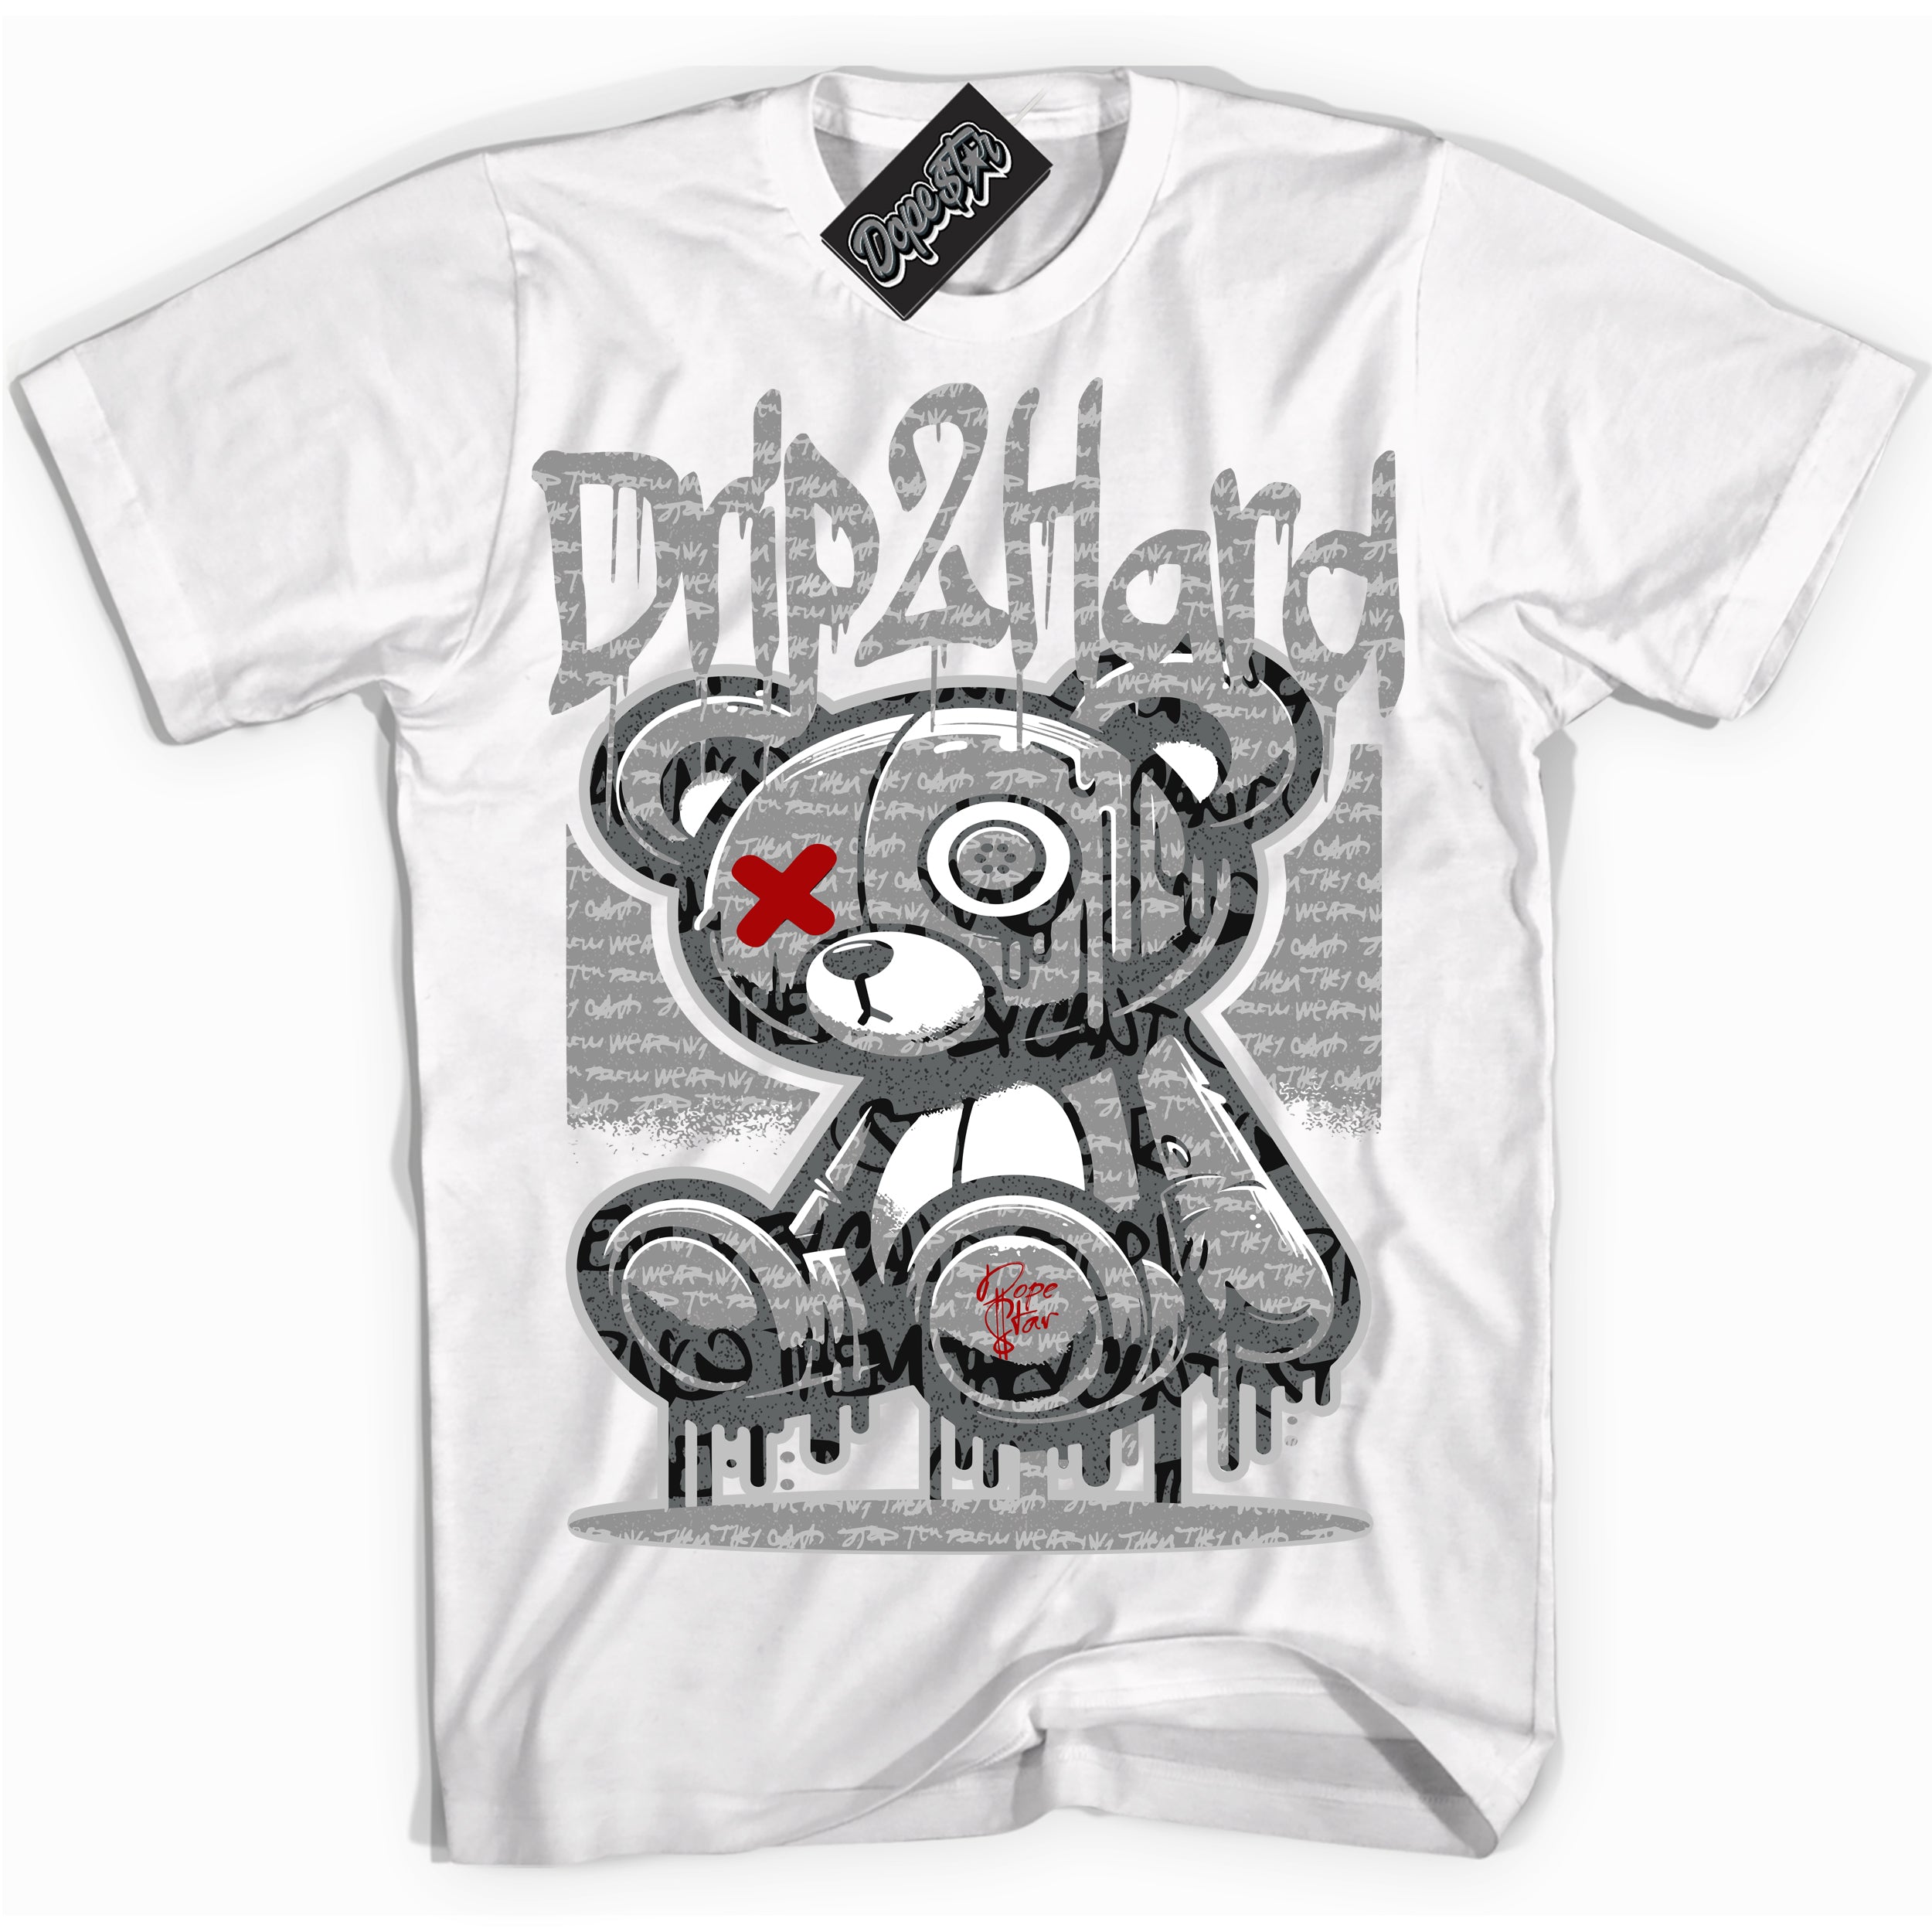 Cool White graphic tee with “ Drip 2 Hard ” design, that perfectly matches Rebellionaire 1s